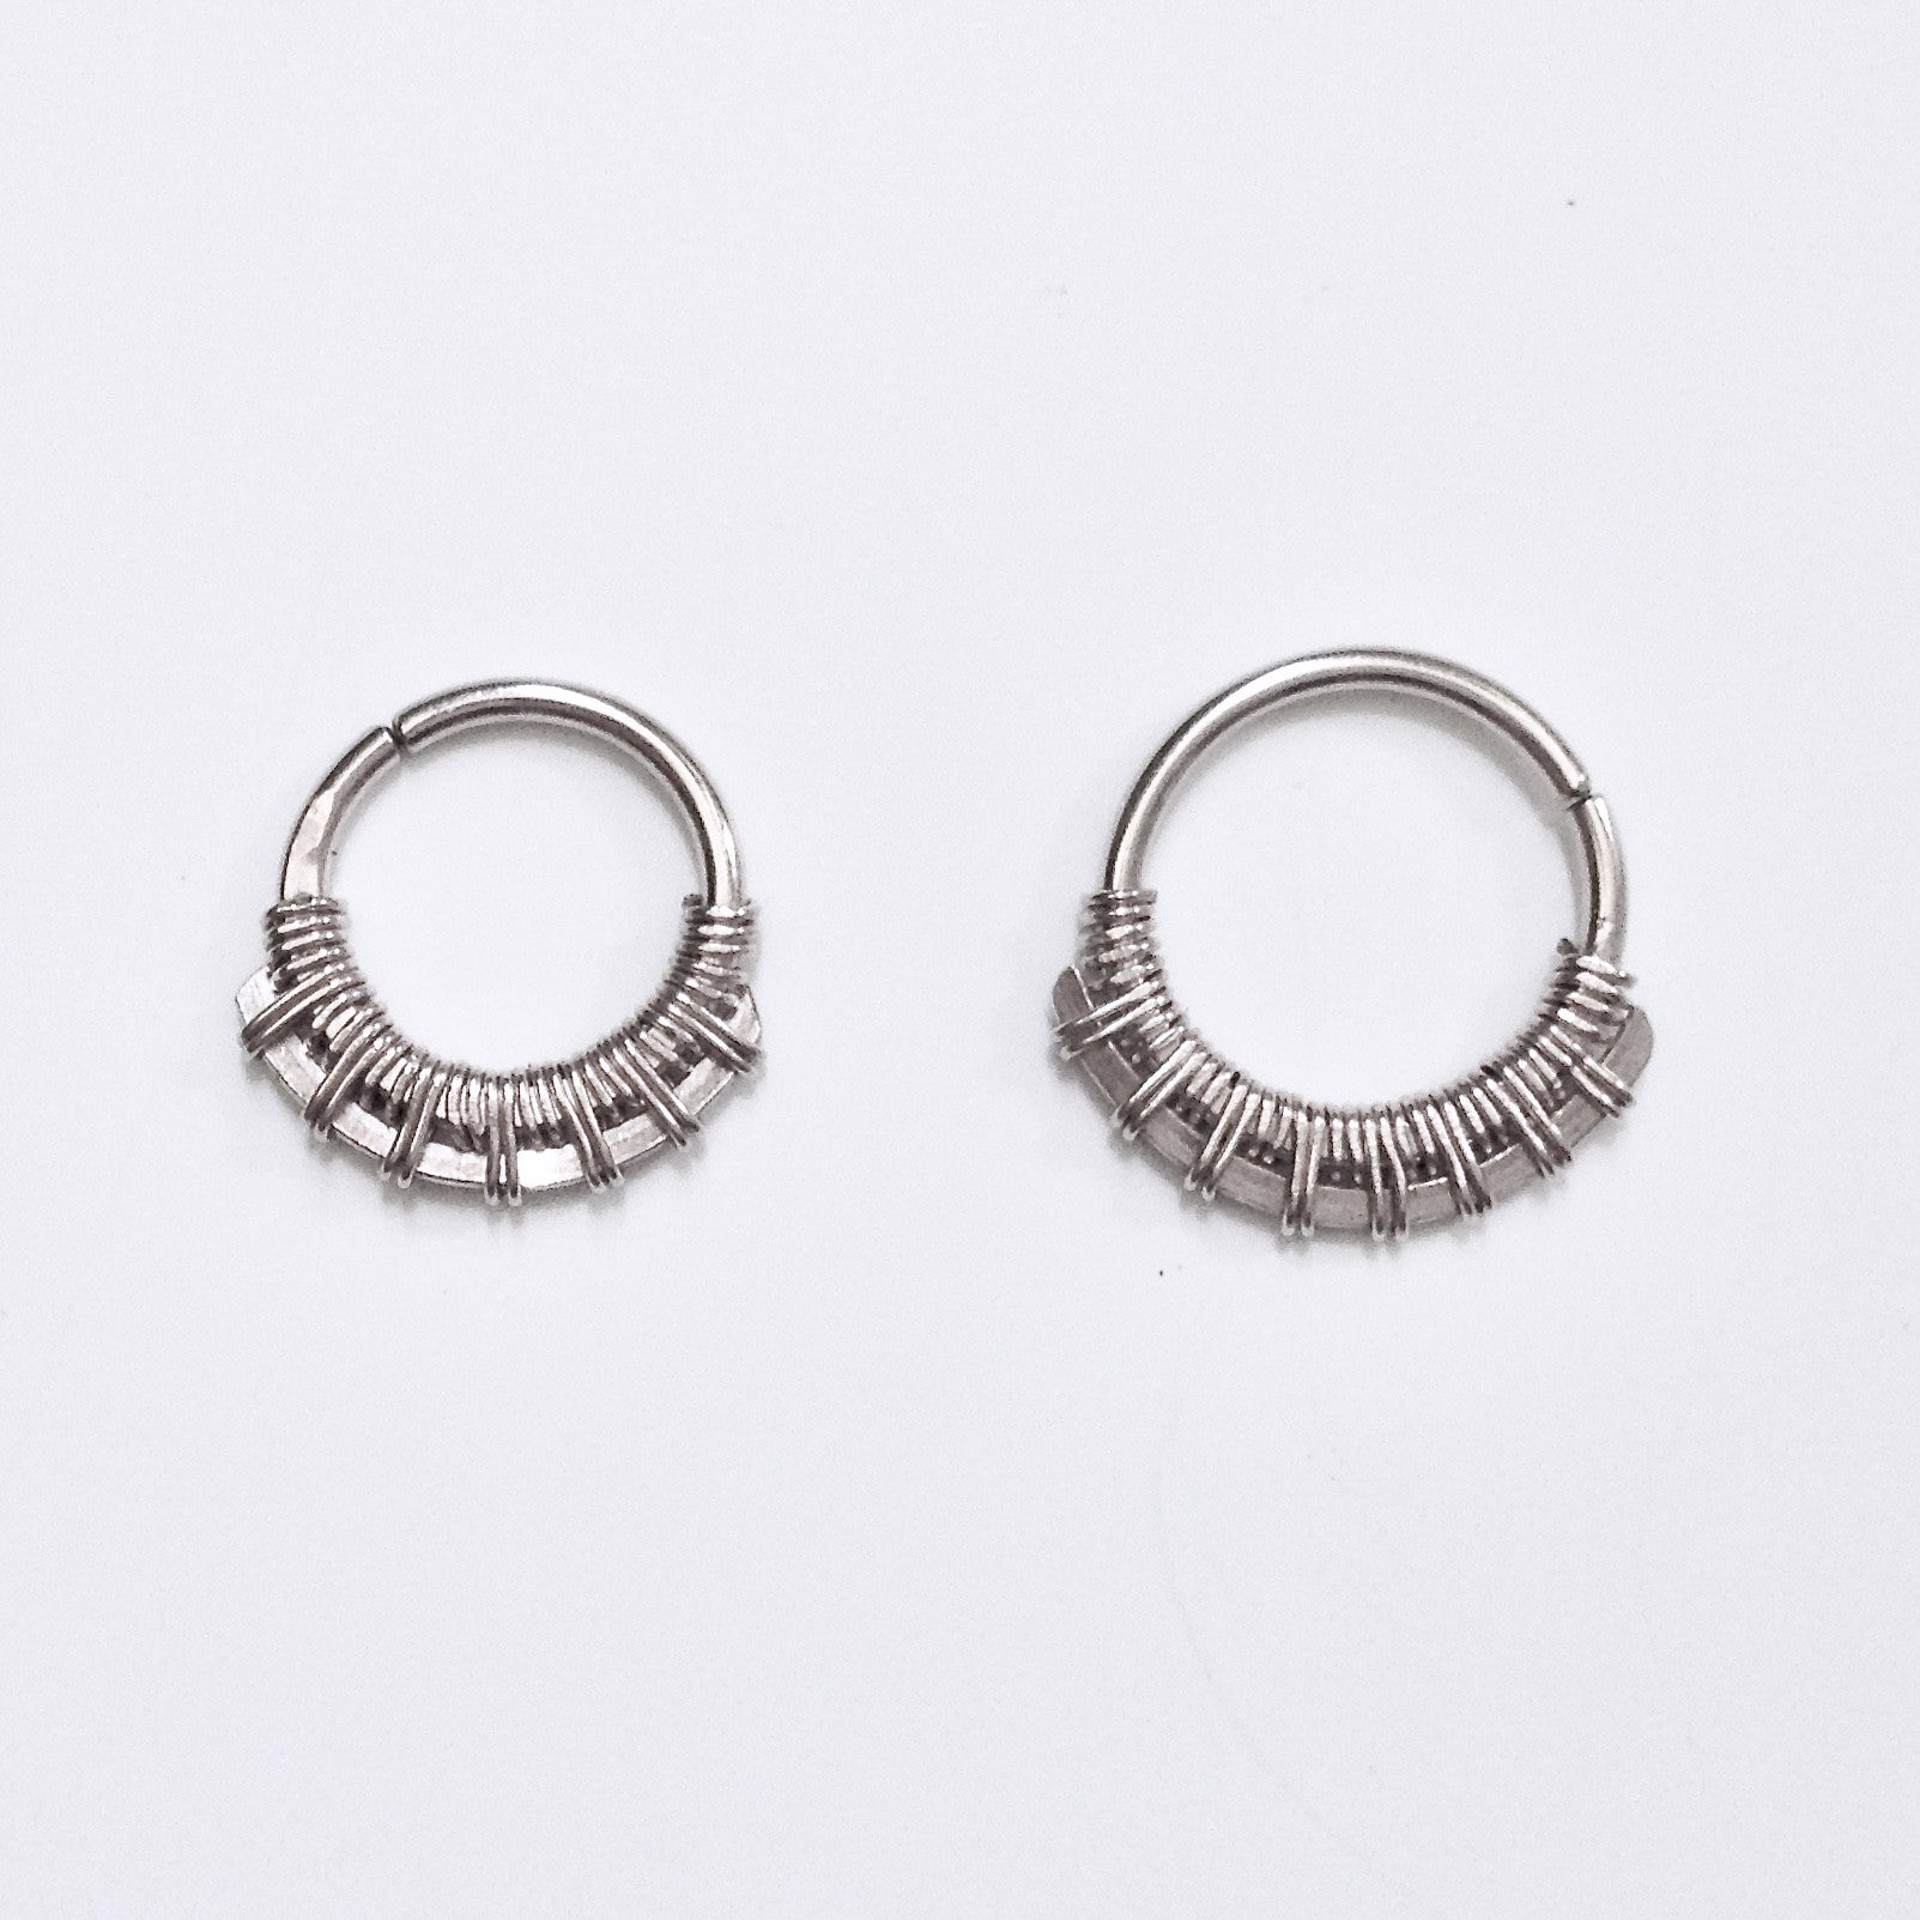 Sundara Septum Ring- Silver - 6mm / 20 by Clementine & Co. Jewelry